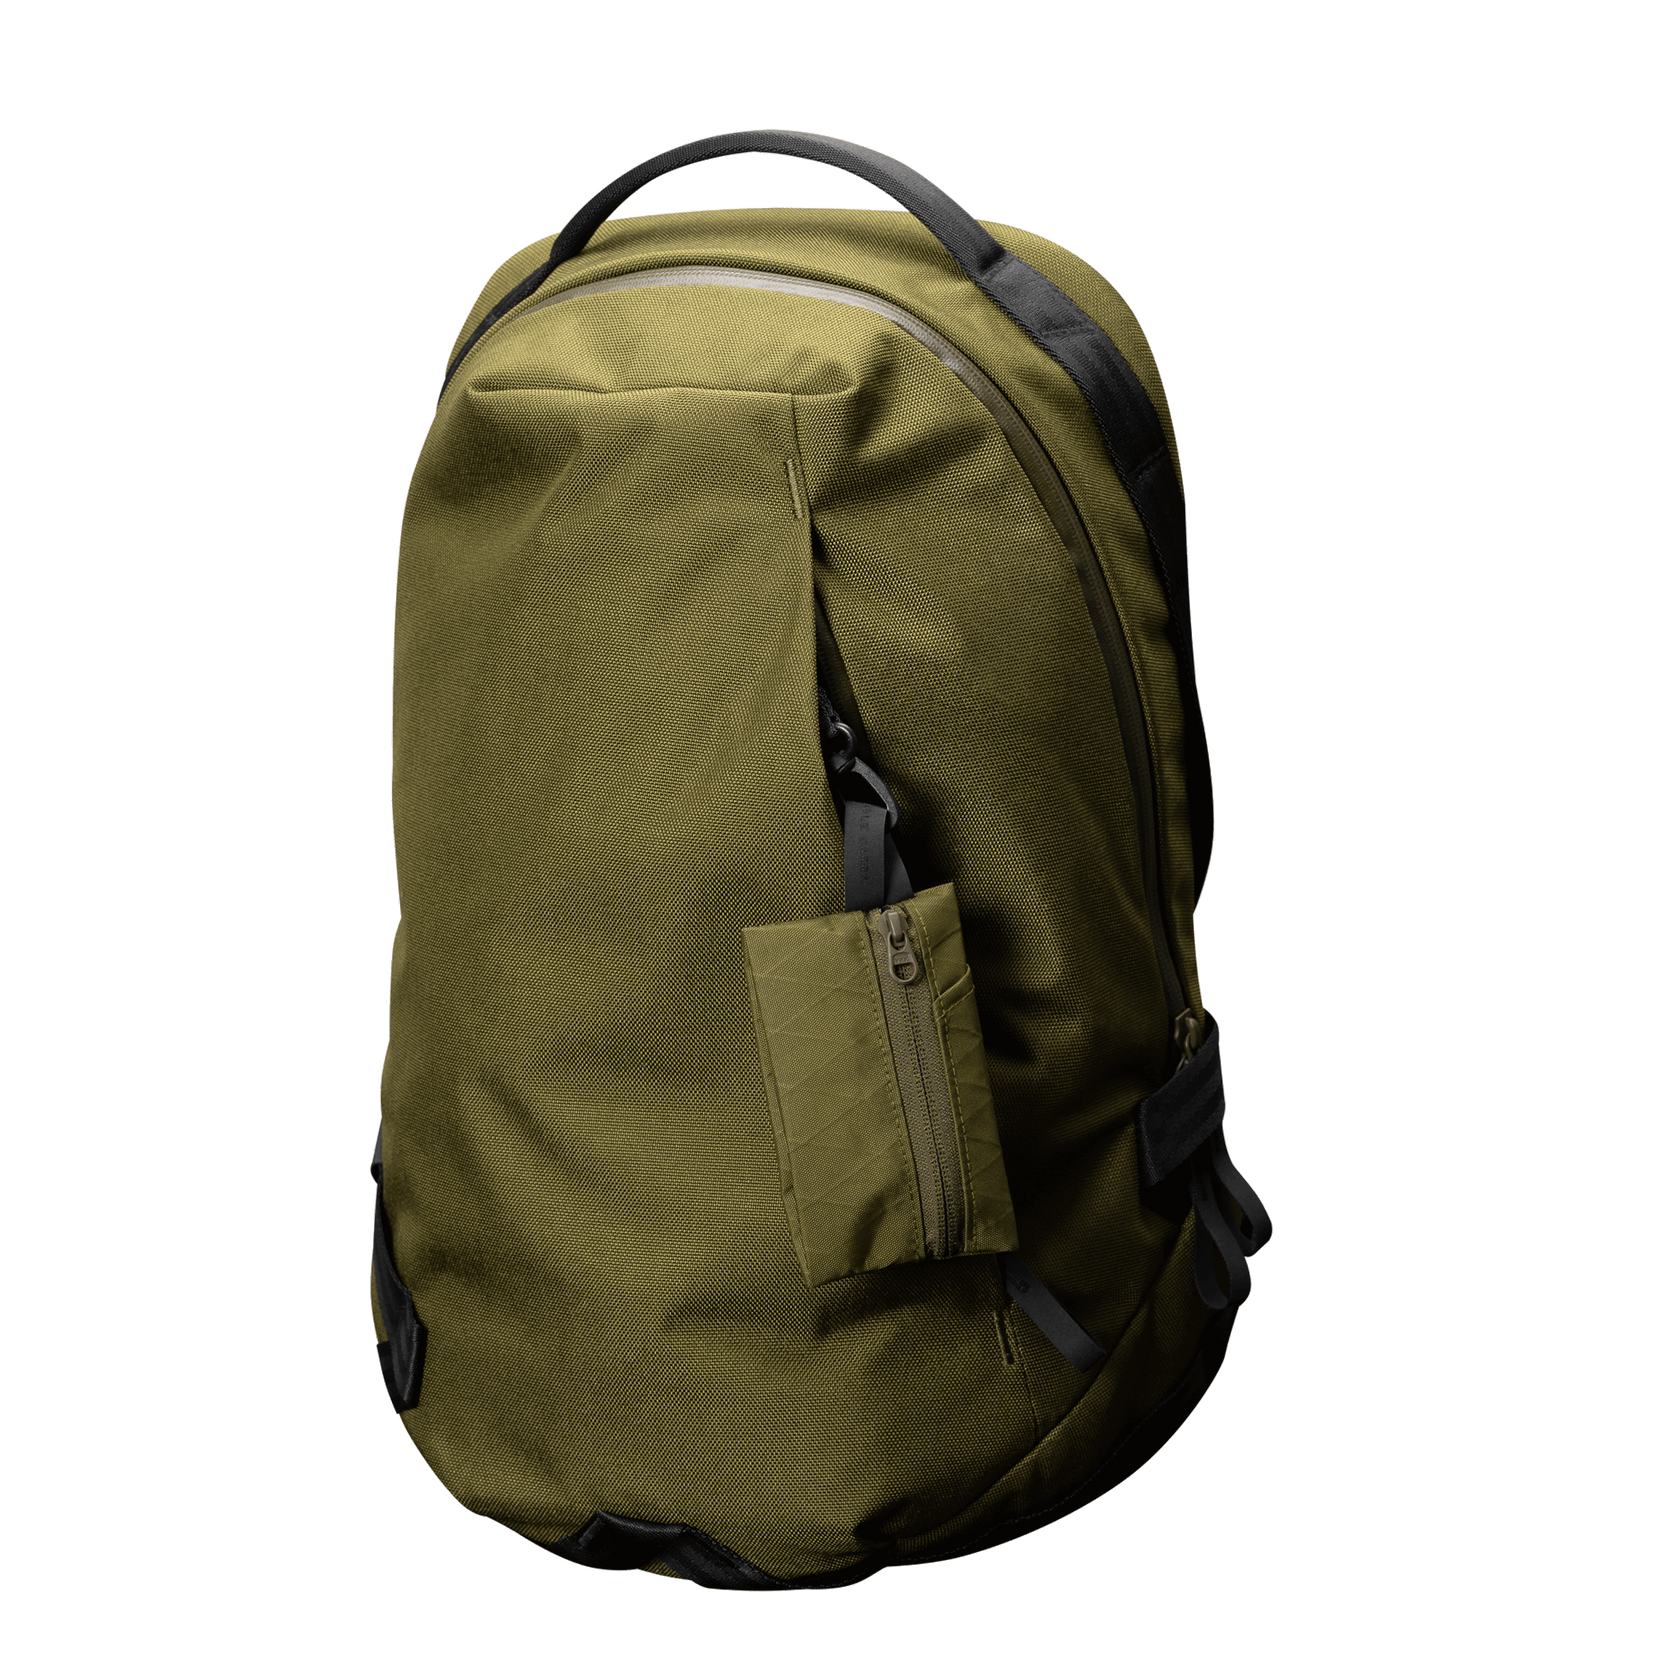 Daily Backpack | Able Carry